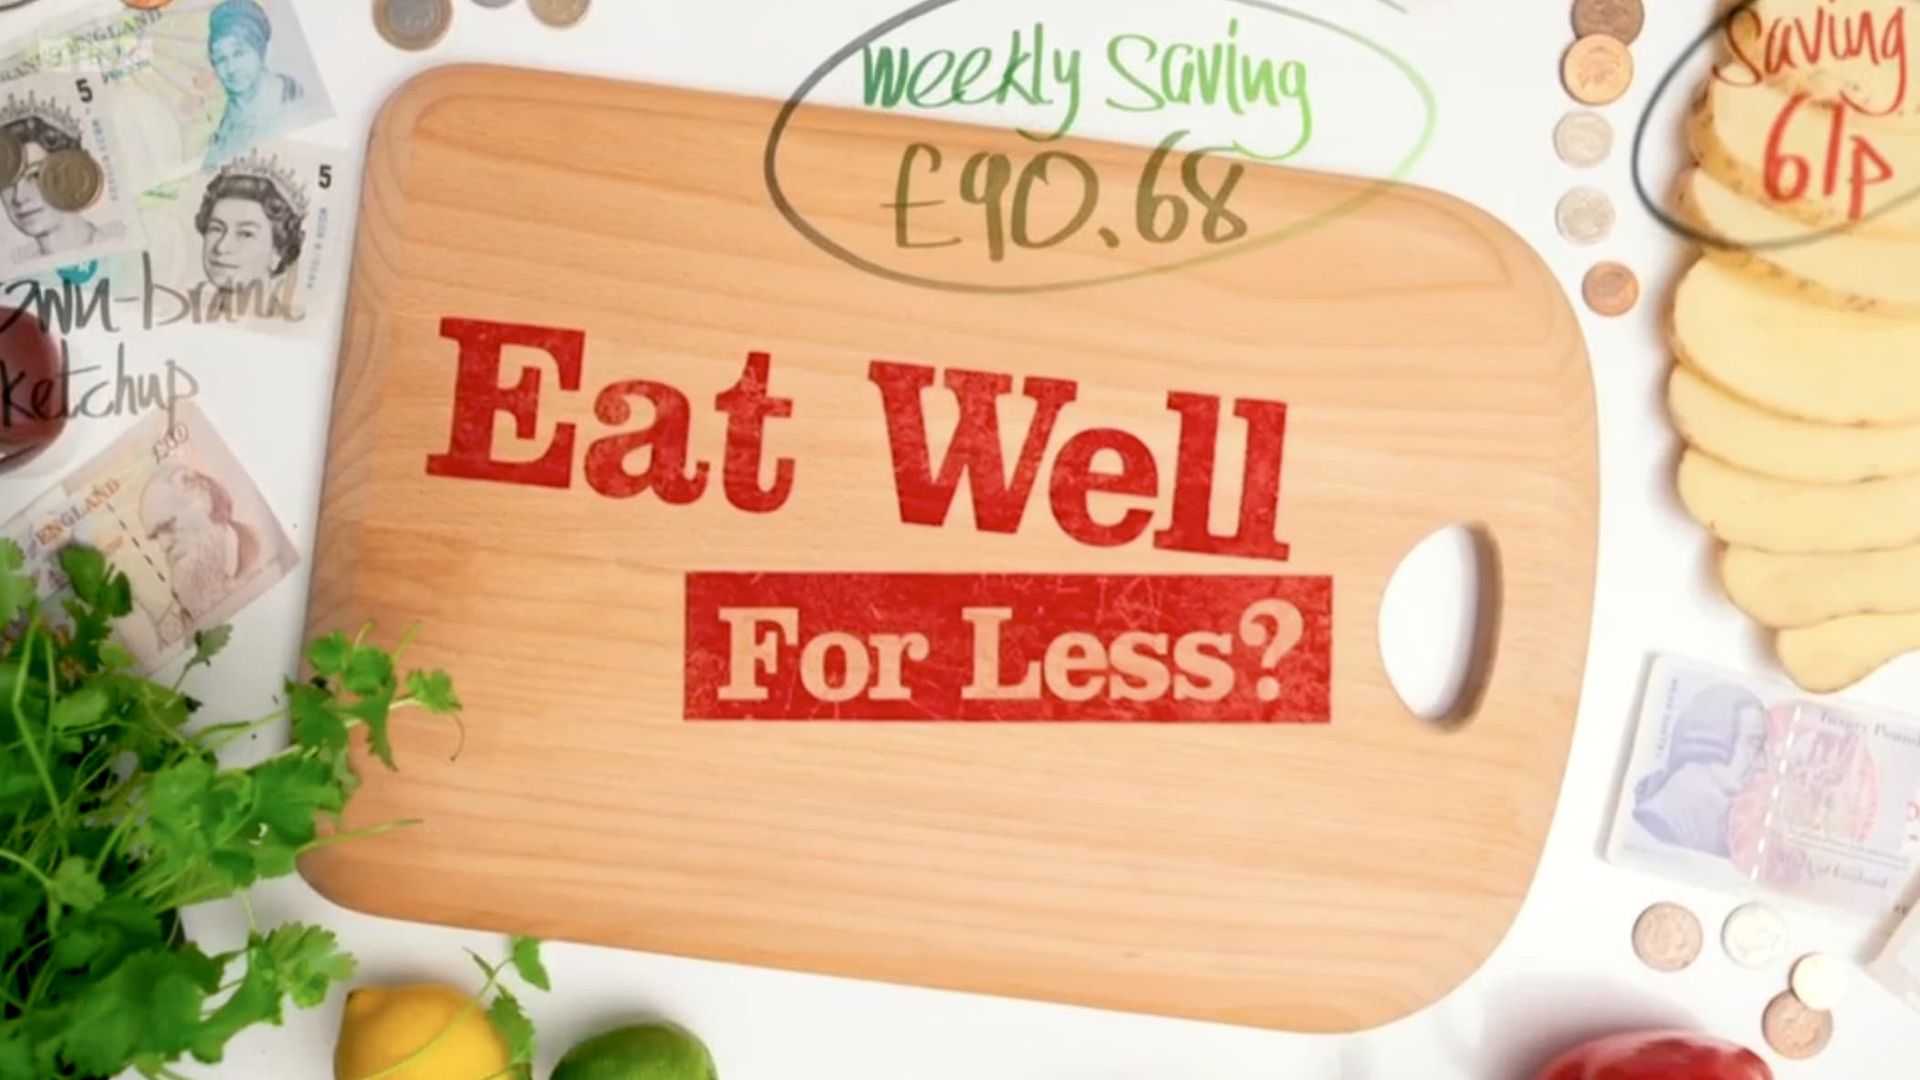 Eat Well for Less? background